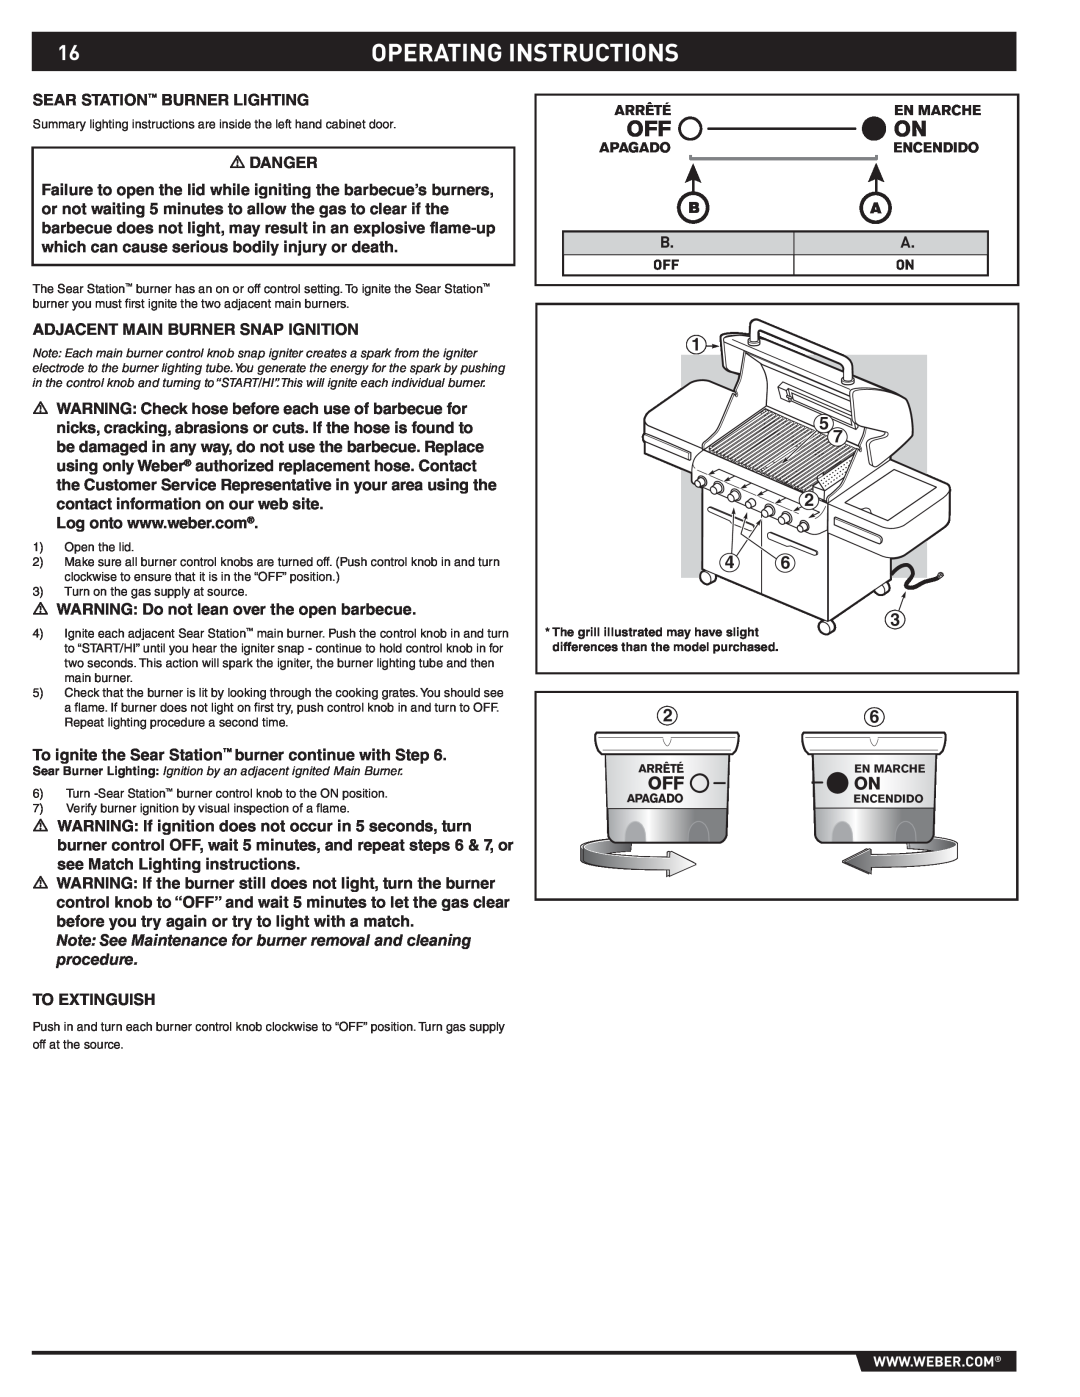 Weber S-470TM manual Operating Instructions, Note See Maintenance for burner removal and cleaning procedure 